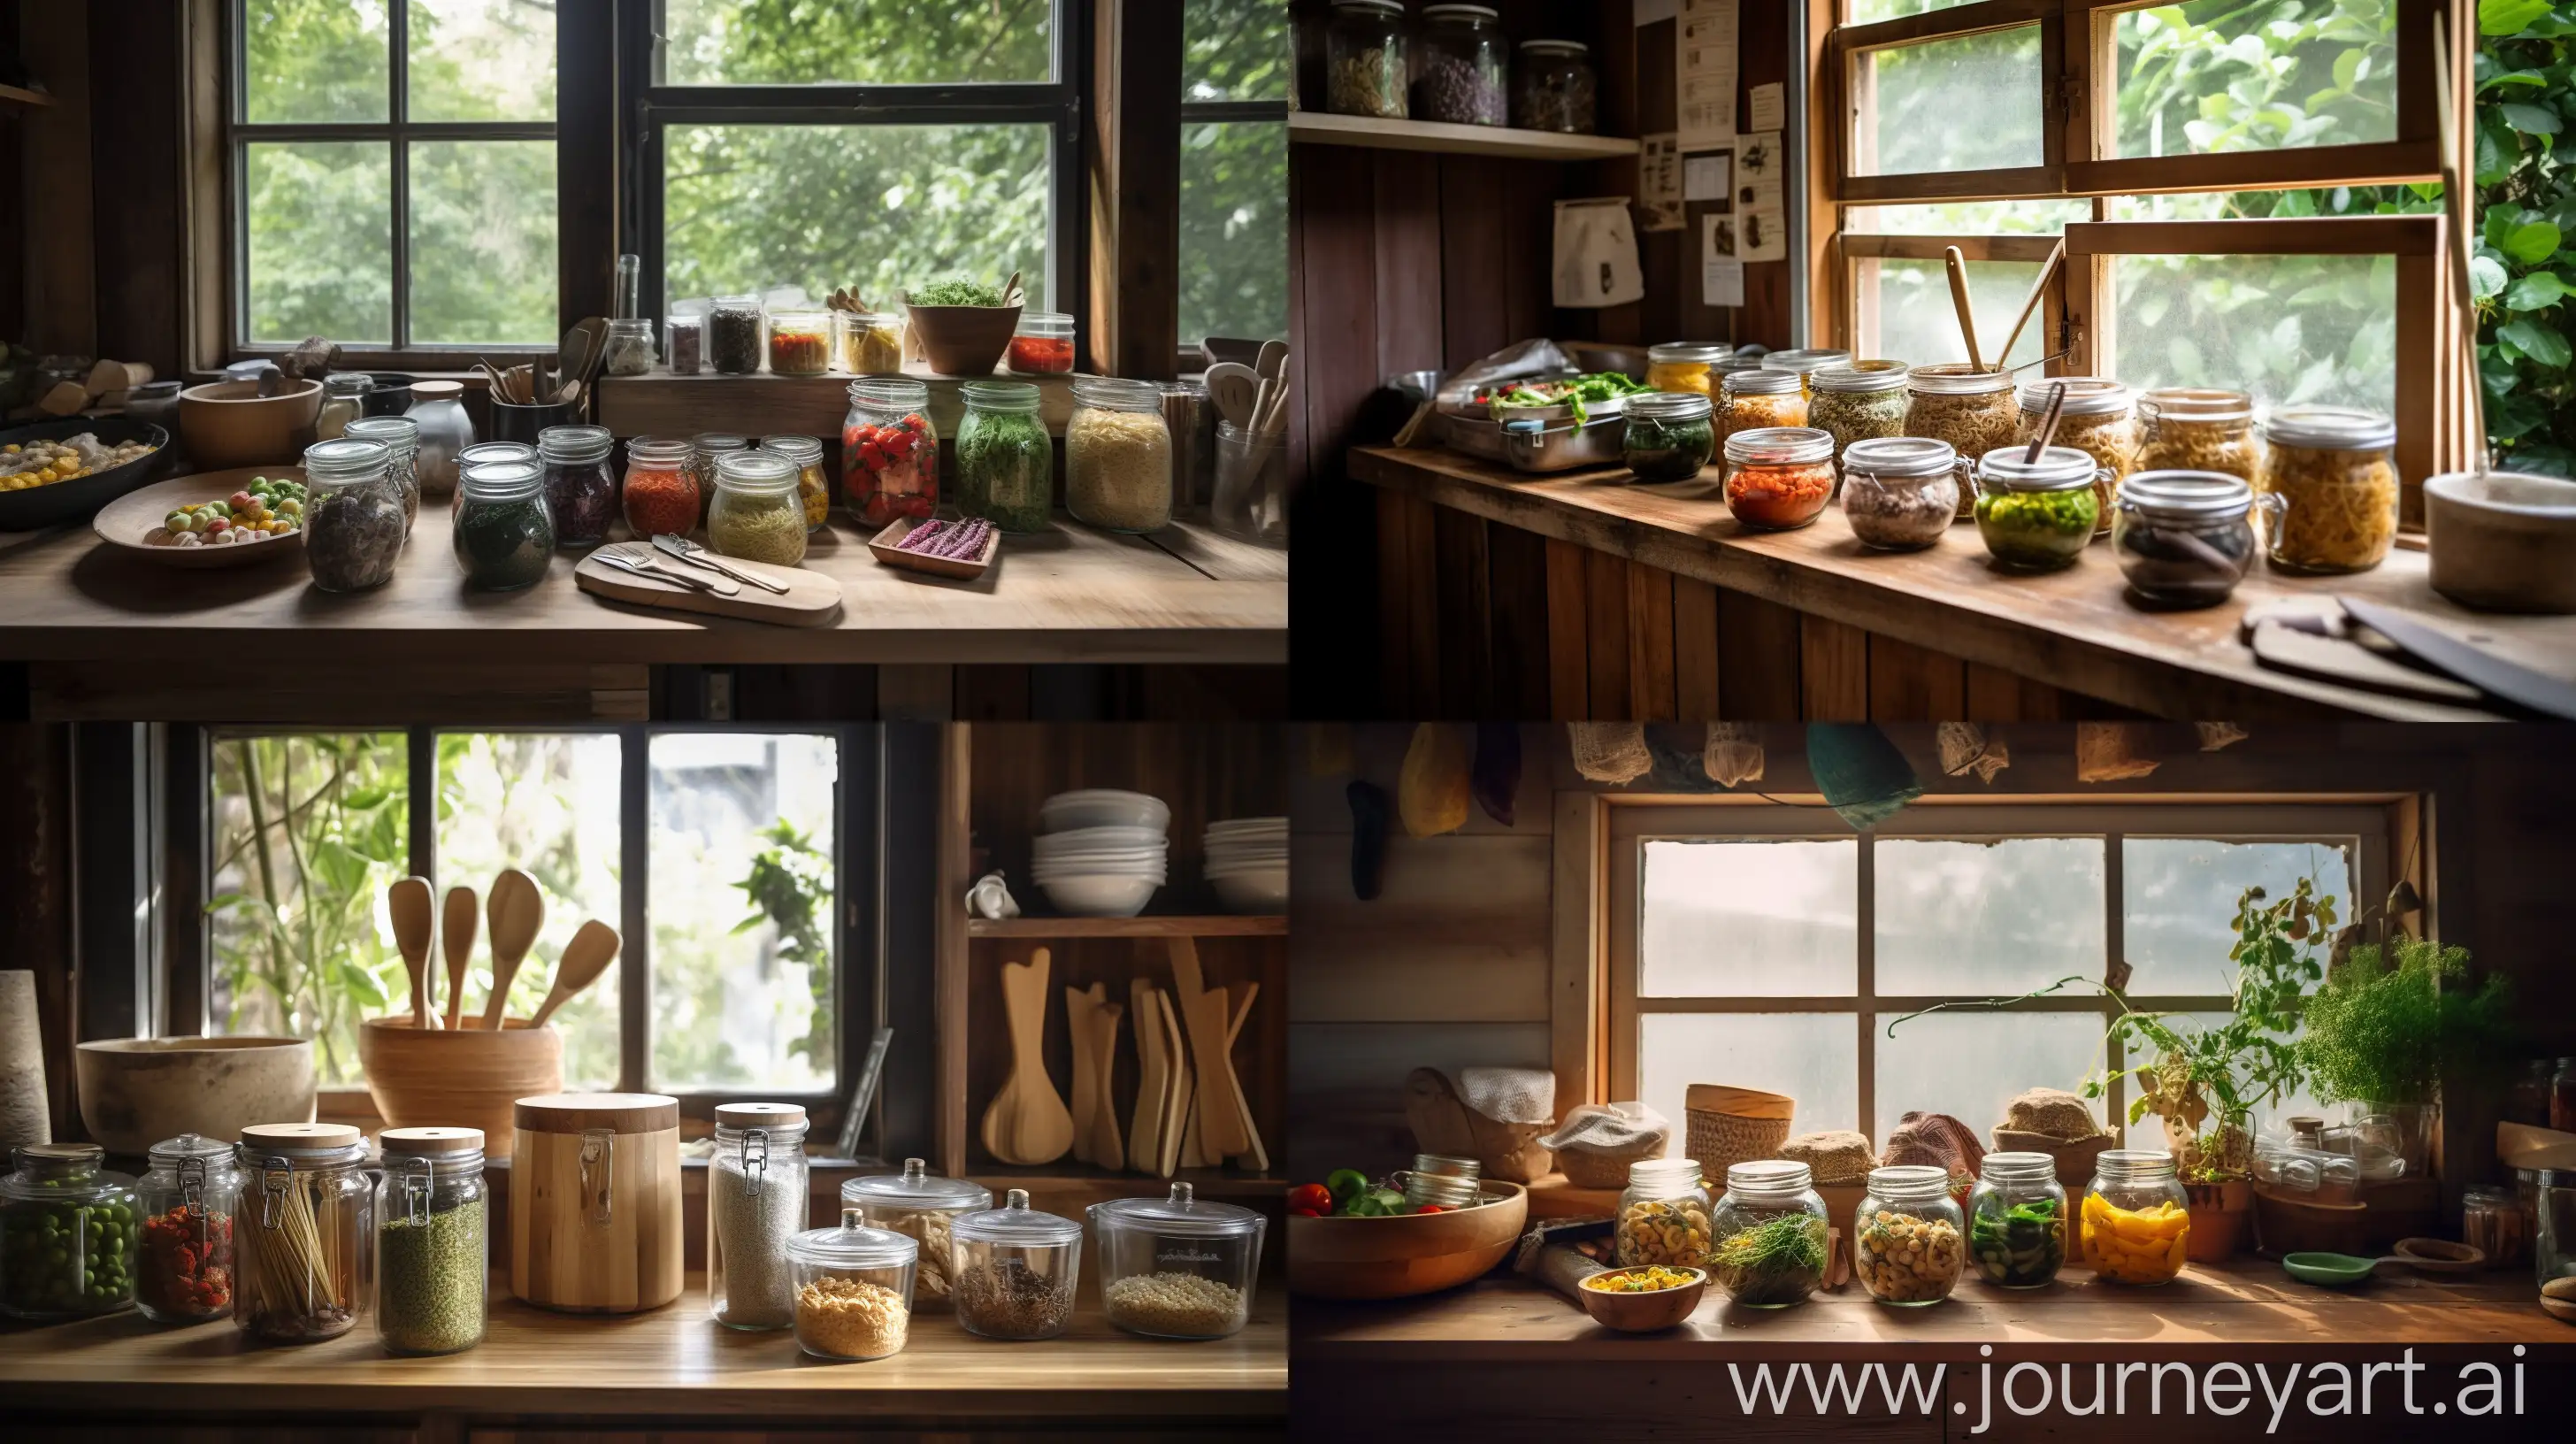 Sustainable-Living-Vibrant-ZeroWaste-Kitchen-with-Reusable-Containers-and-Bamboo-Utensils